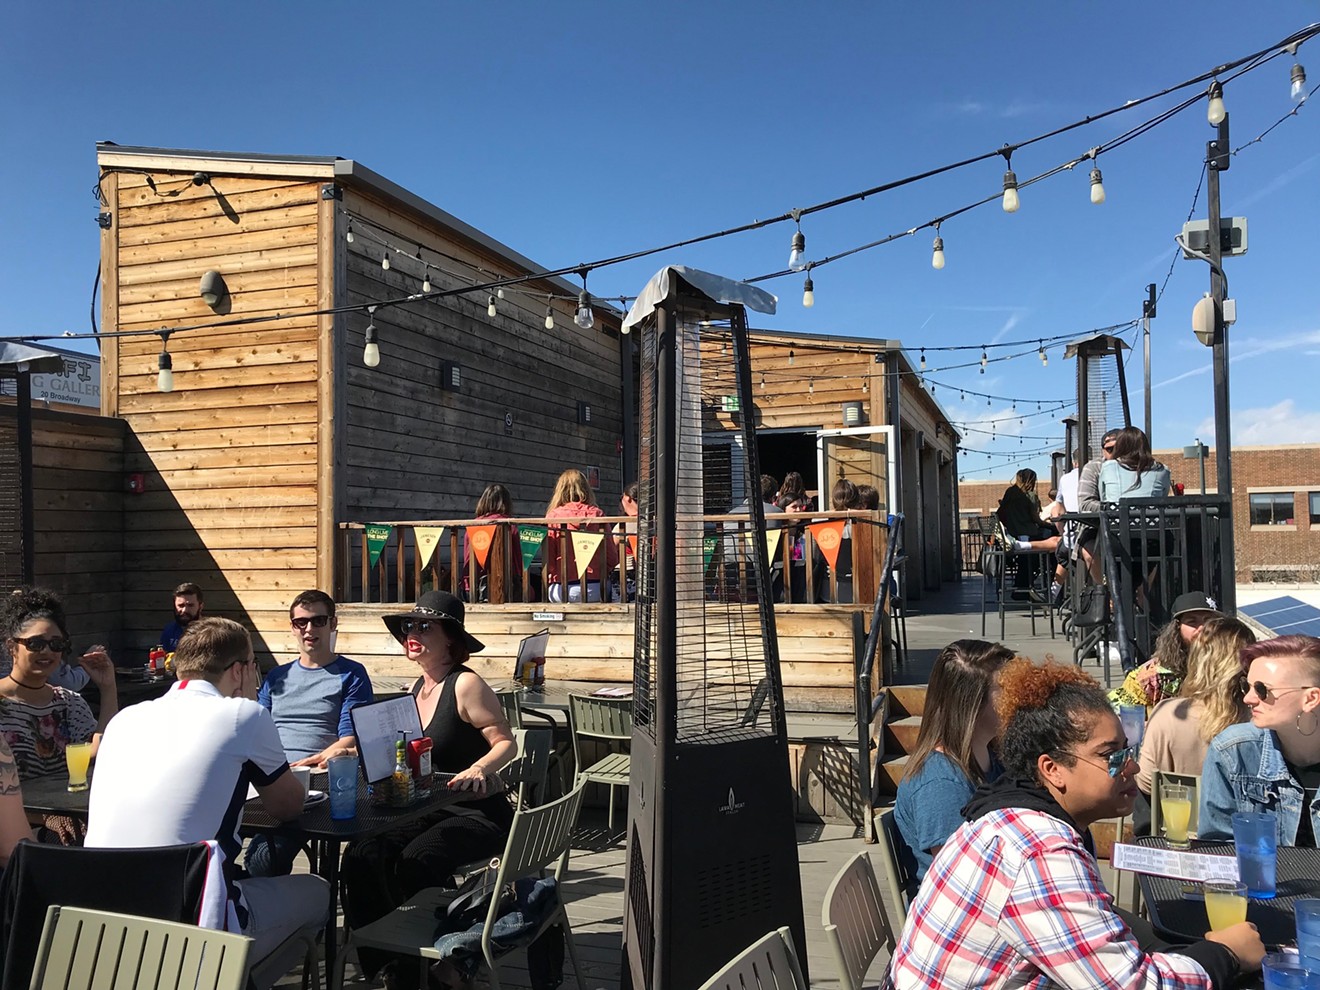 The rooftop patio at Historians Ale House is a great setting for brunch.